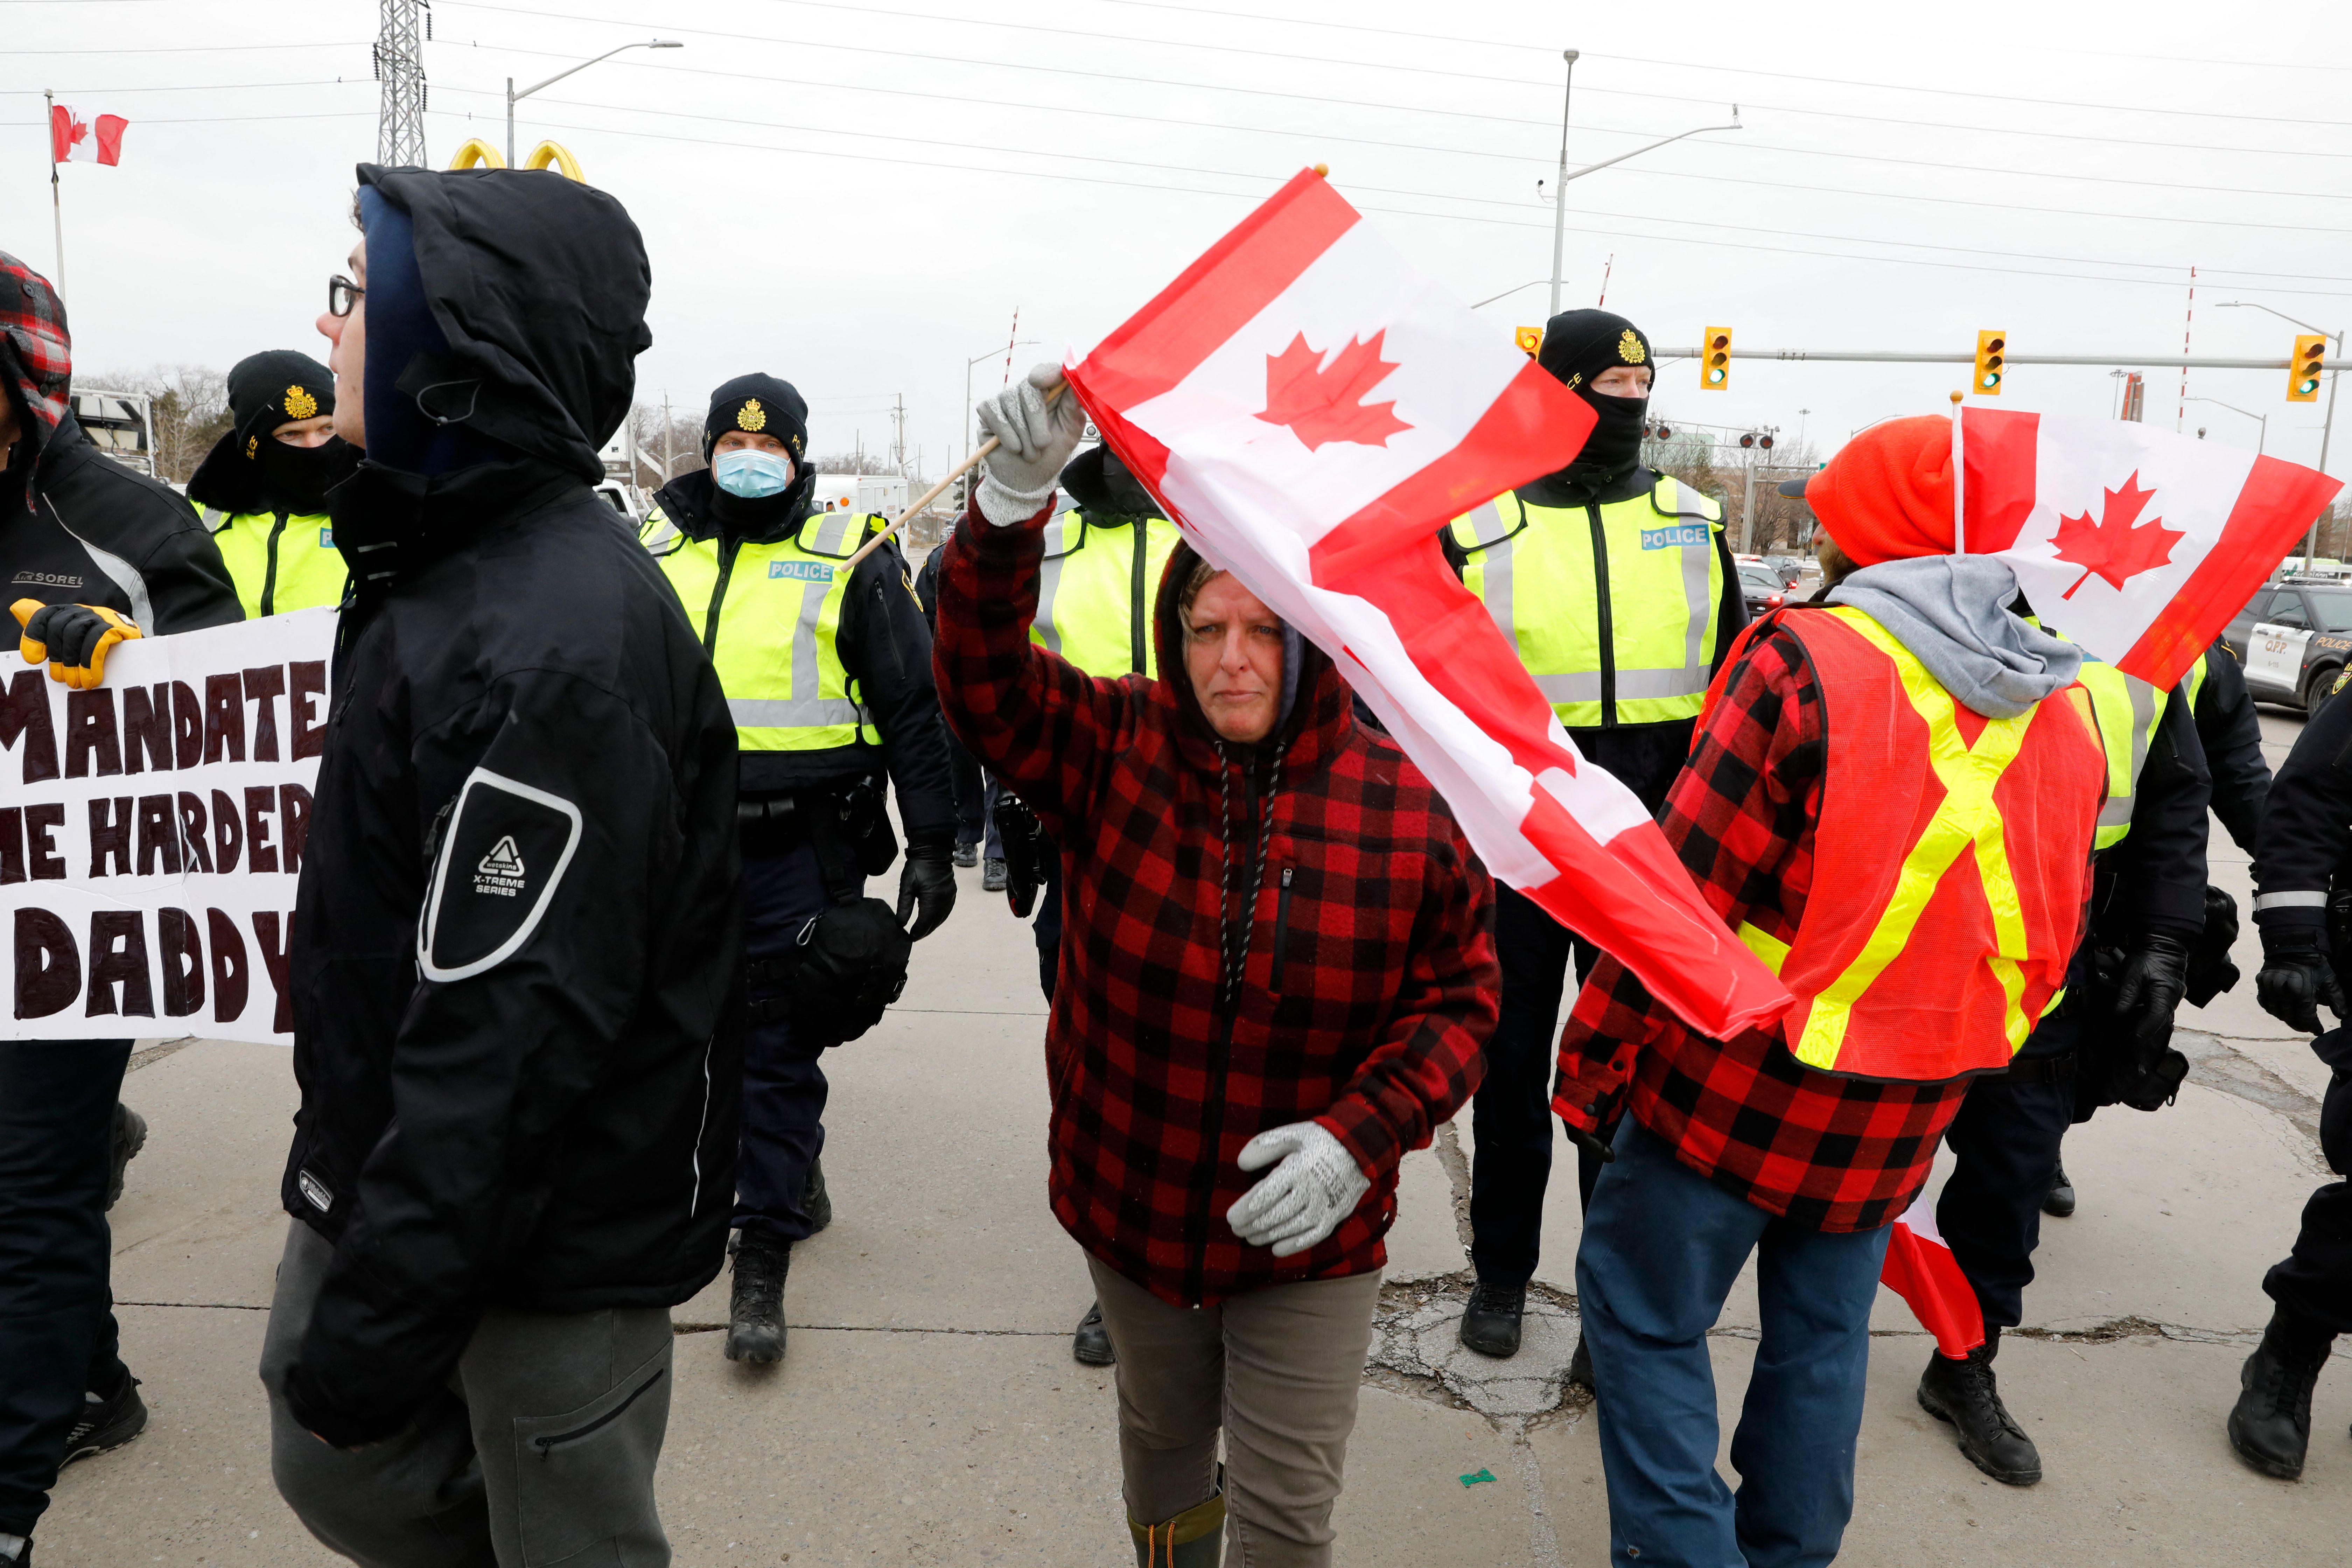 Ontario Provincial Police move protestors against Covid-19 vaccine mandates as they try to clear the entrance to the Ambassador Bridge in Windsor, Ontario, Canada, on February 12, 2022.